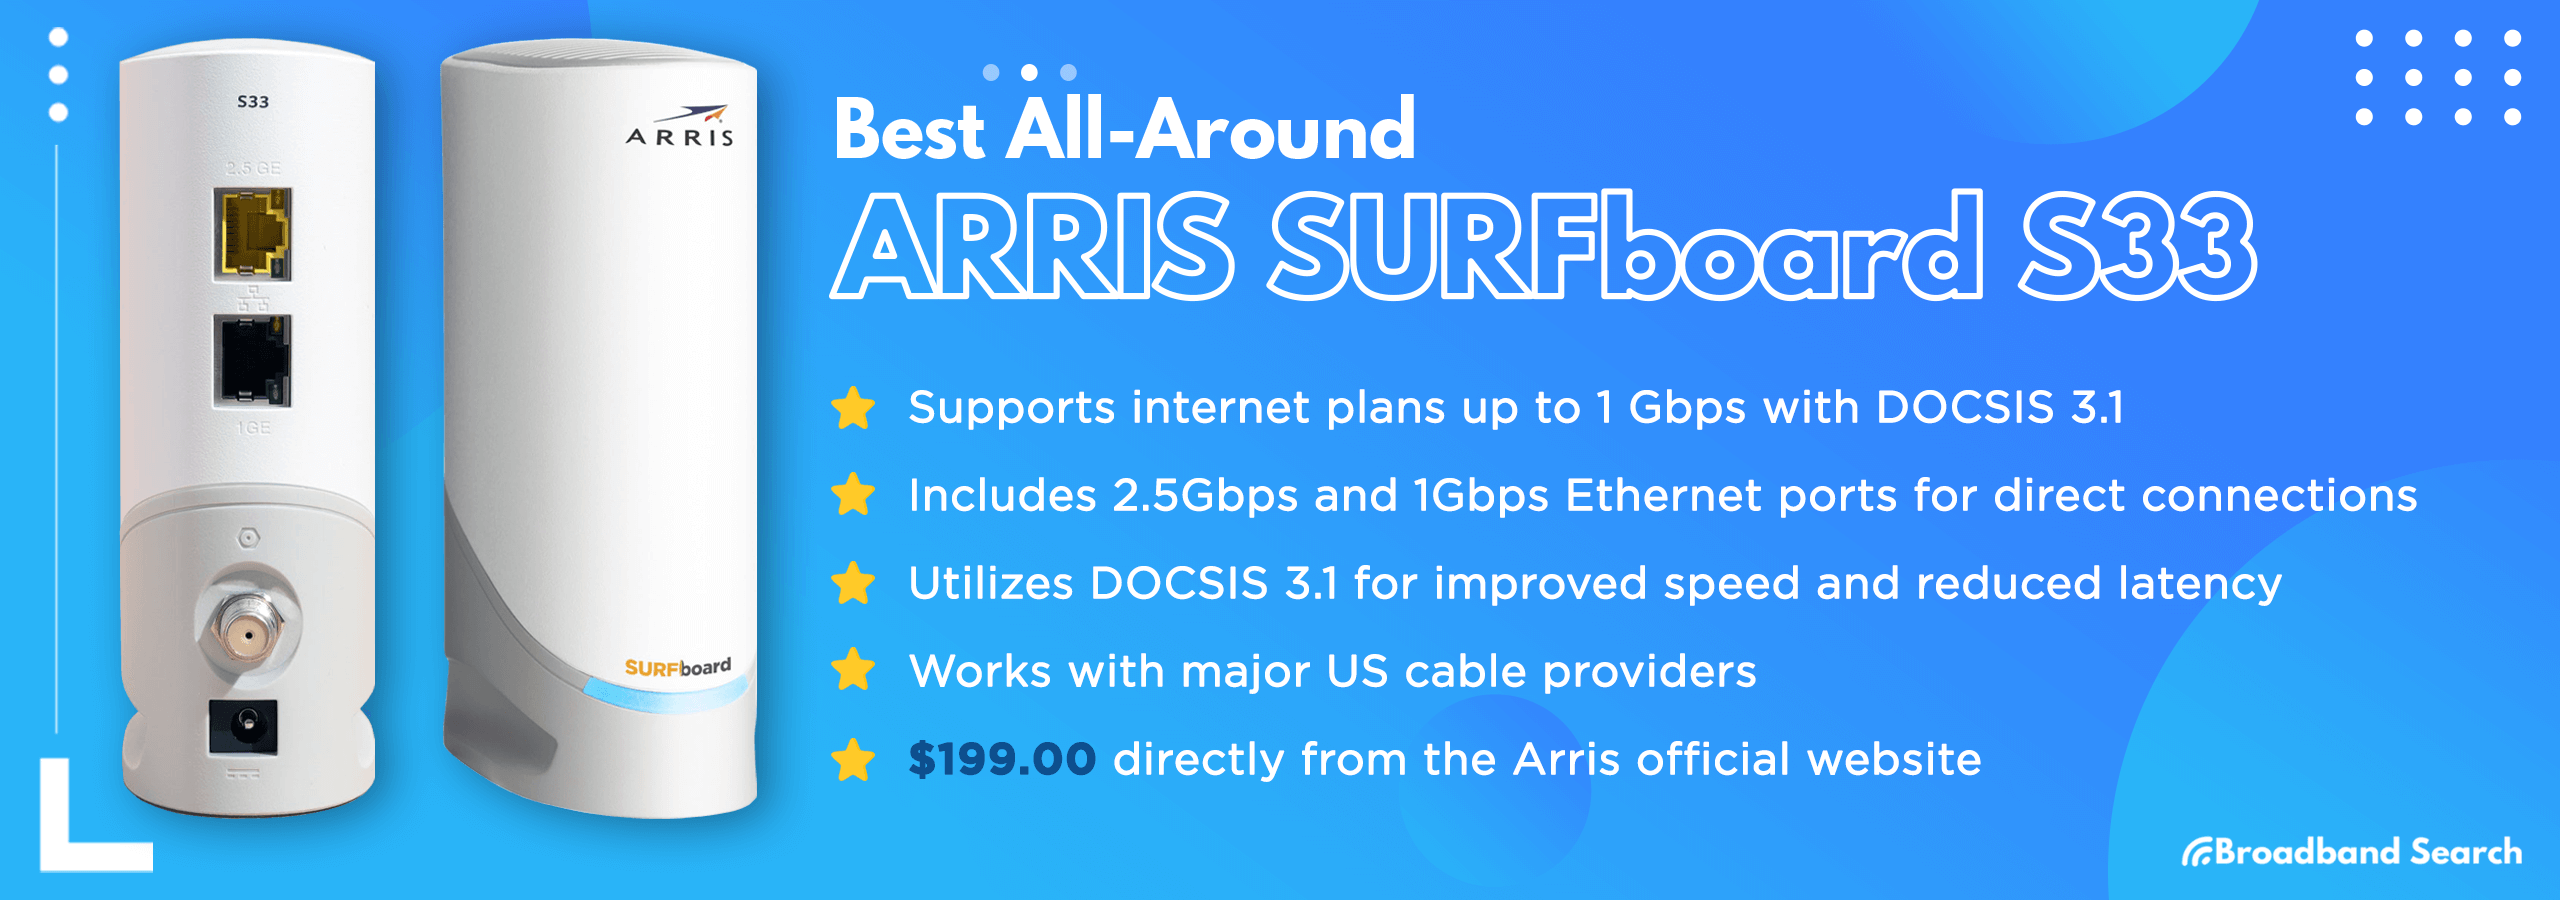 Best modem all-around, ARRIS SURFboard S33, with included product details